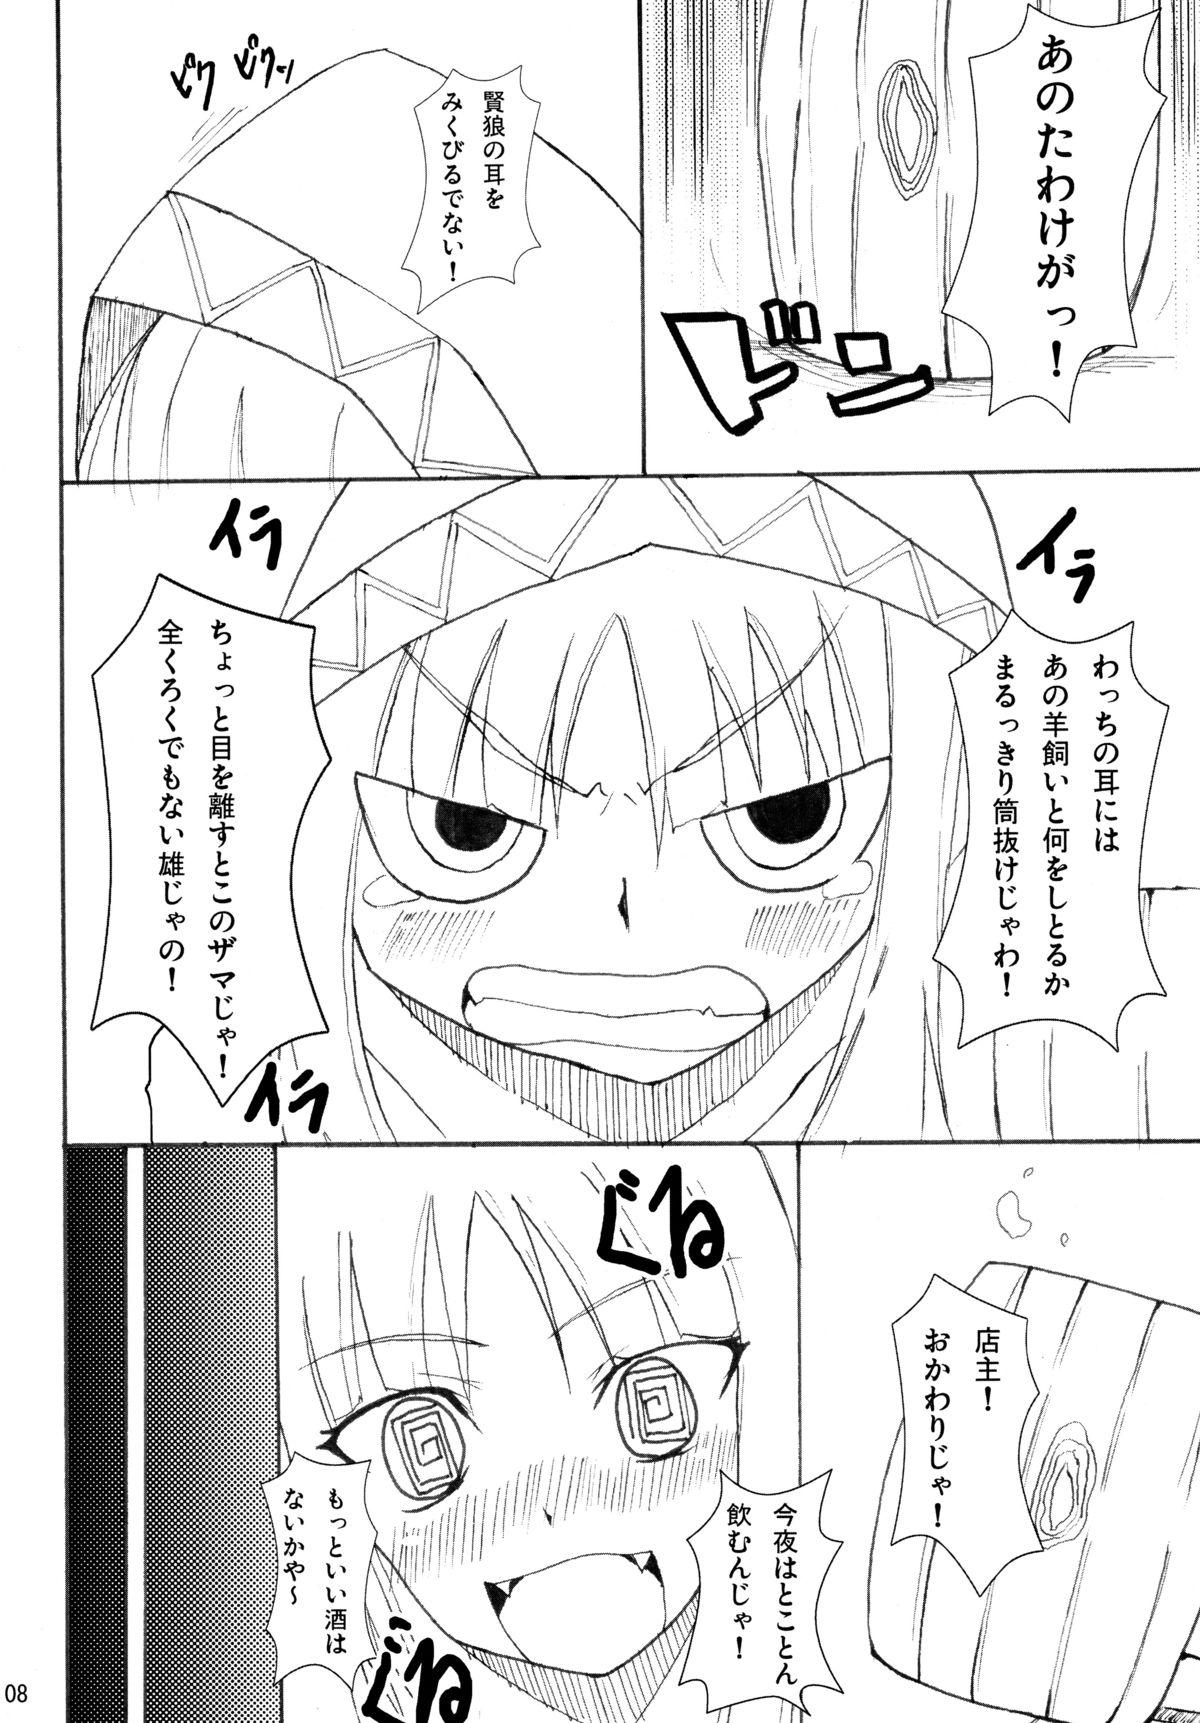 Asstomouth Naked Spice - Spice and wolf Old - Page 8